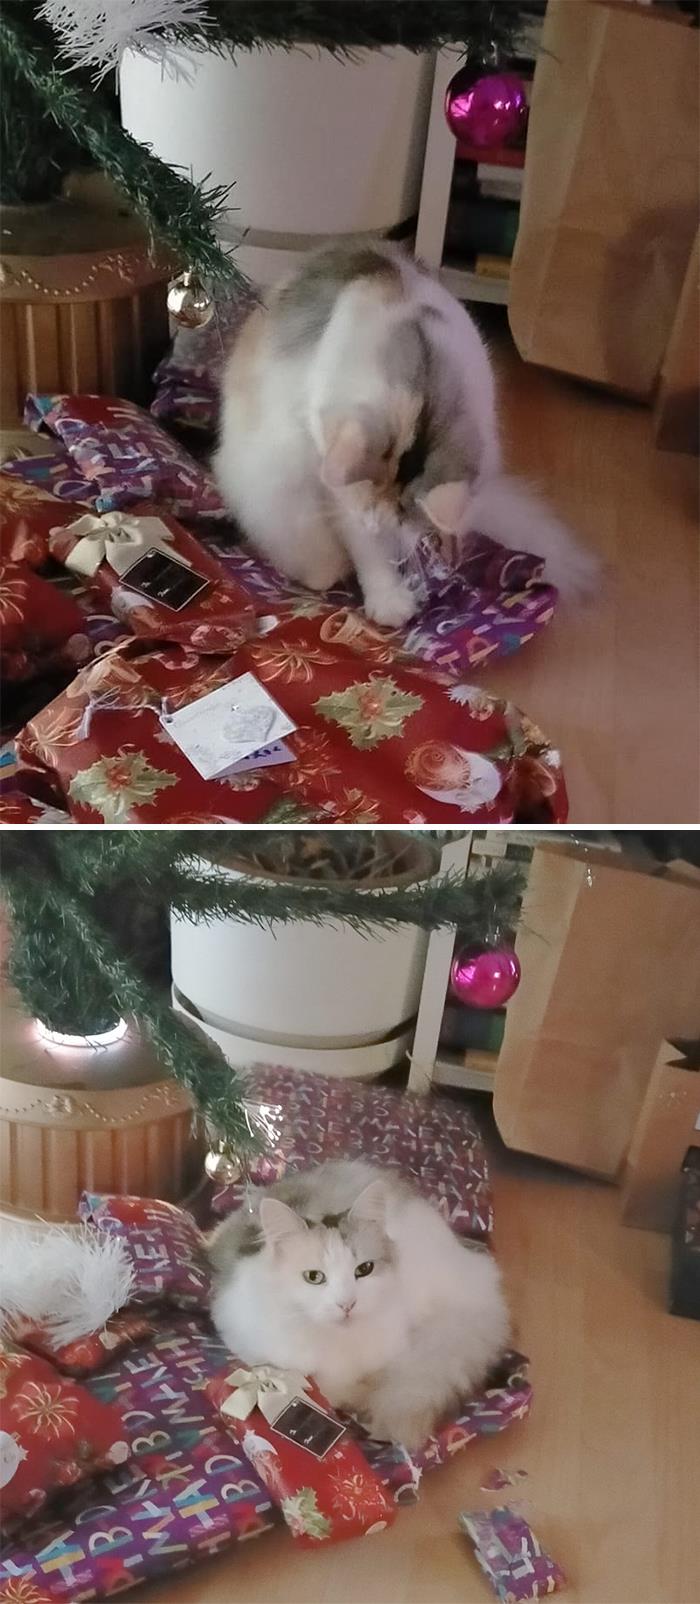 Not My Cat Is Back, Attacking Our Christmas Tree And Ripping Open Our Presents. Might Be Time To Send Her Home